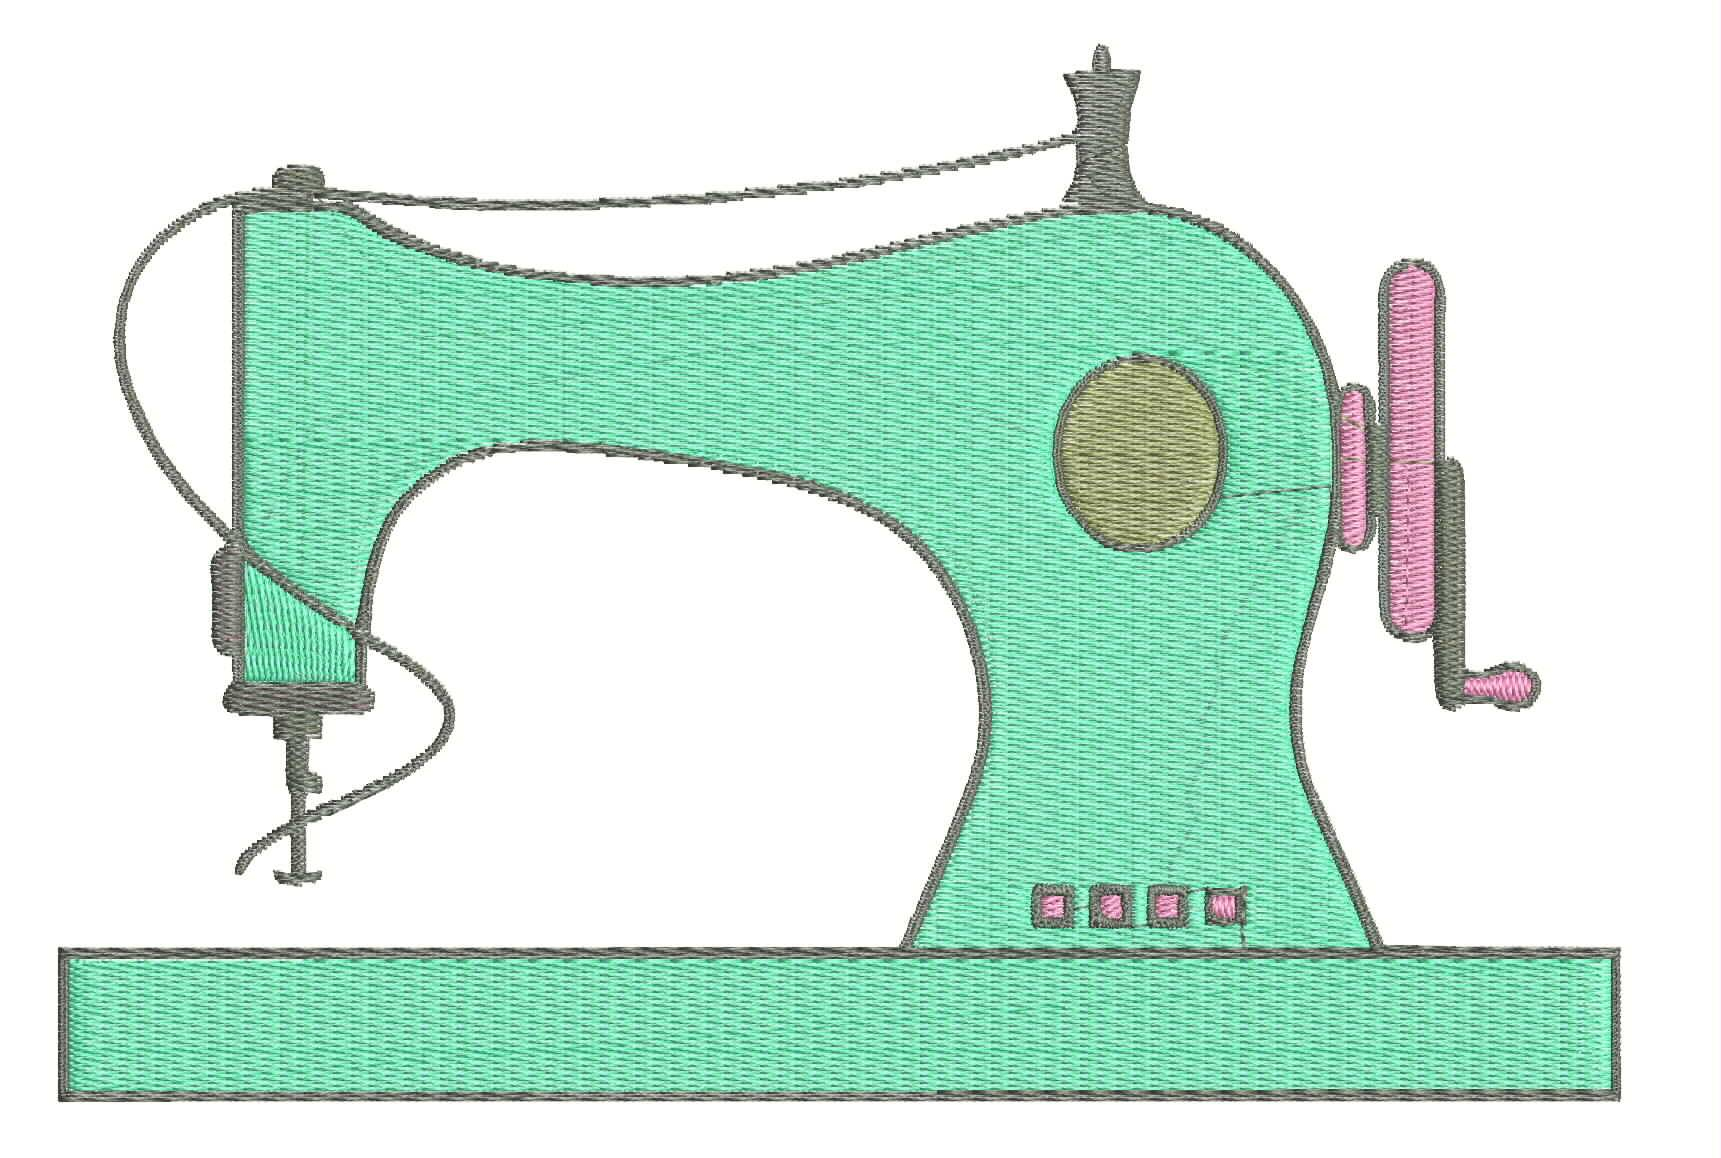 Embroidery Patterns For Sewing Machines Sewing Machine Embroidery Designembroidery Digitizingsewing